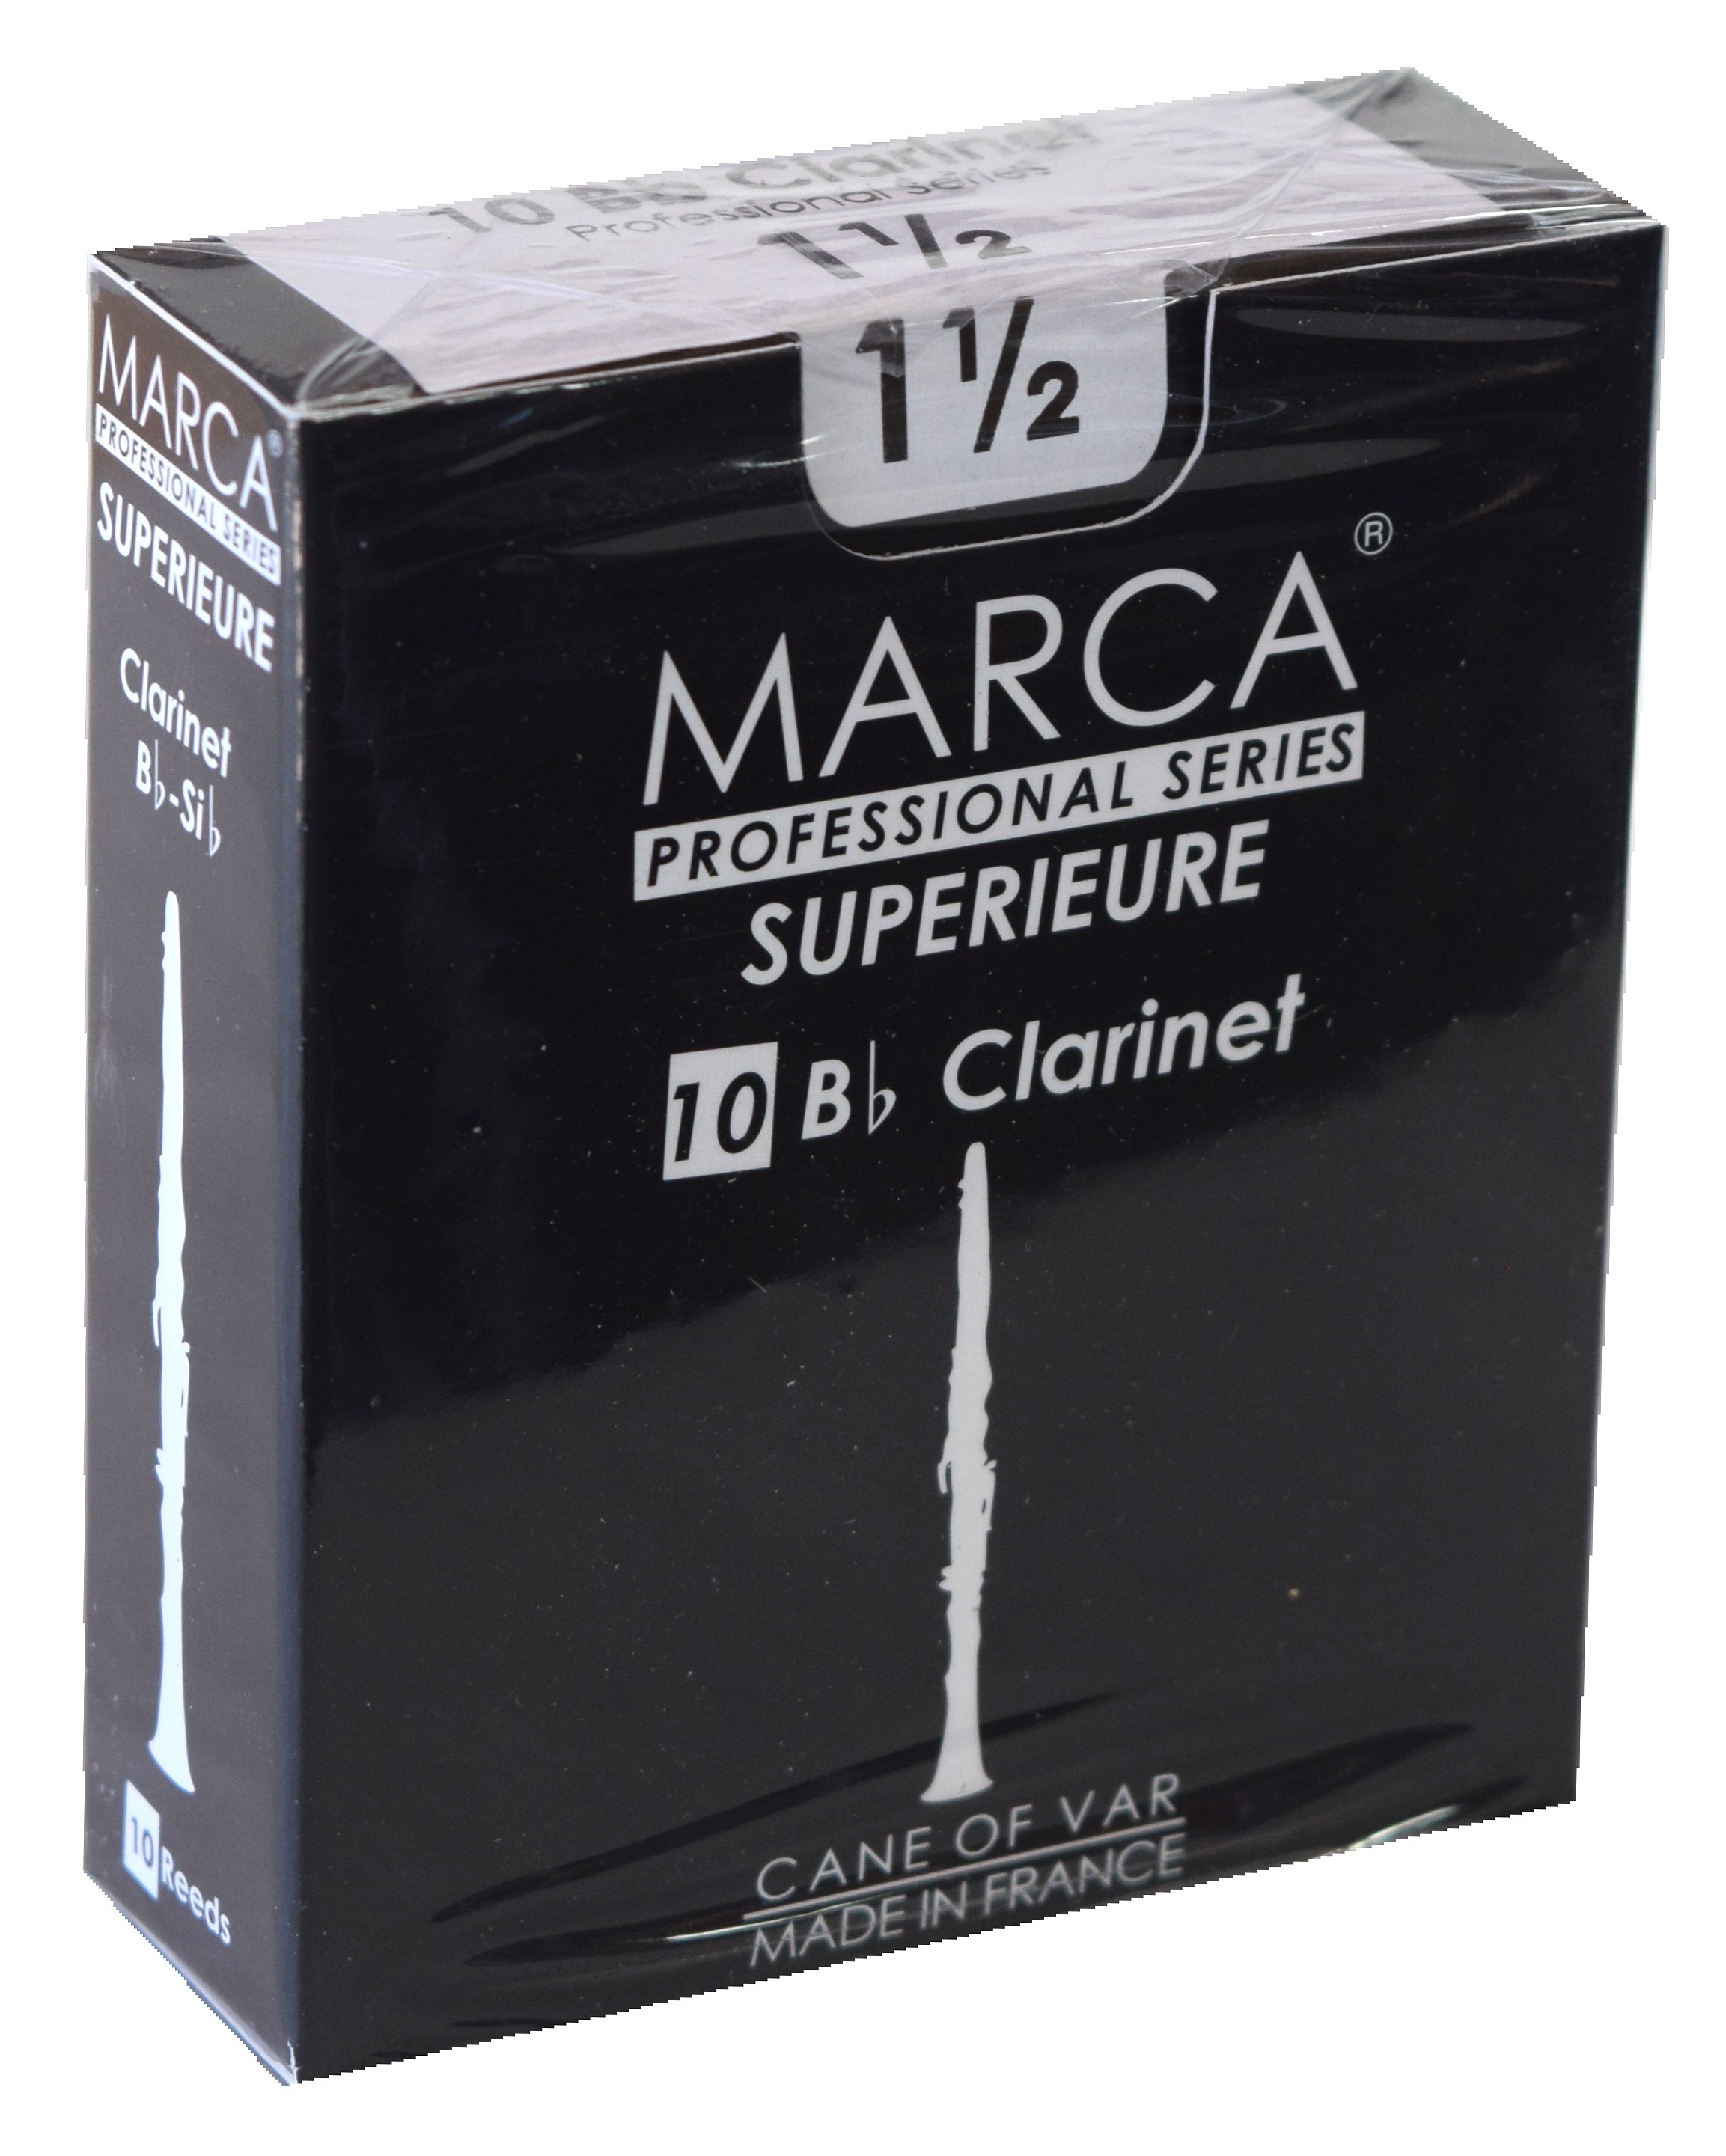 Marca Superieure - Professional Clarinet Reeds (Box of 10) - 1 1/2